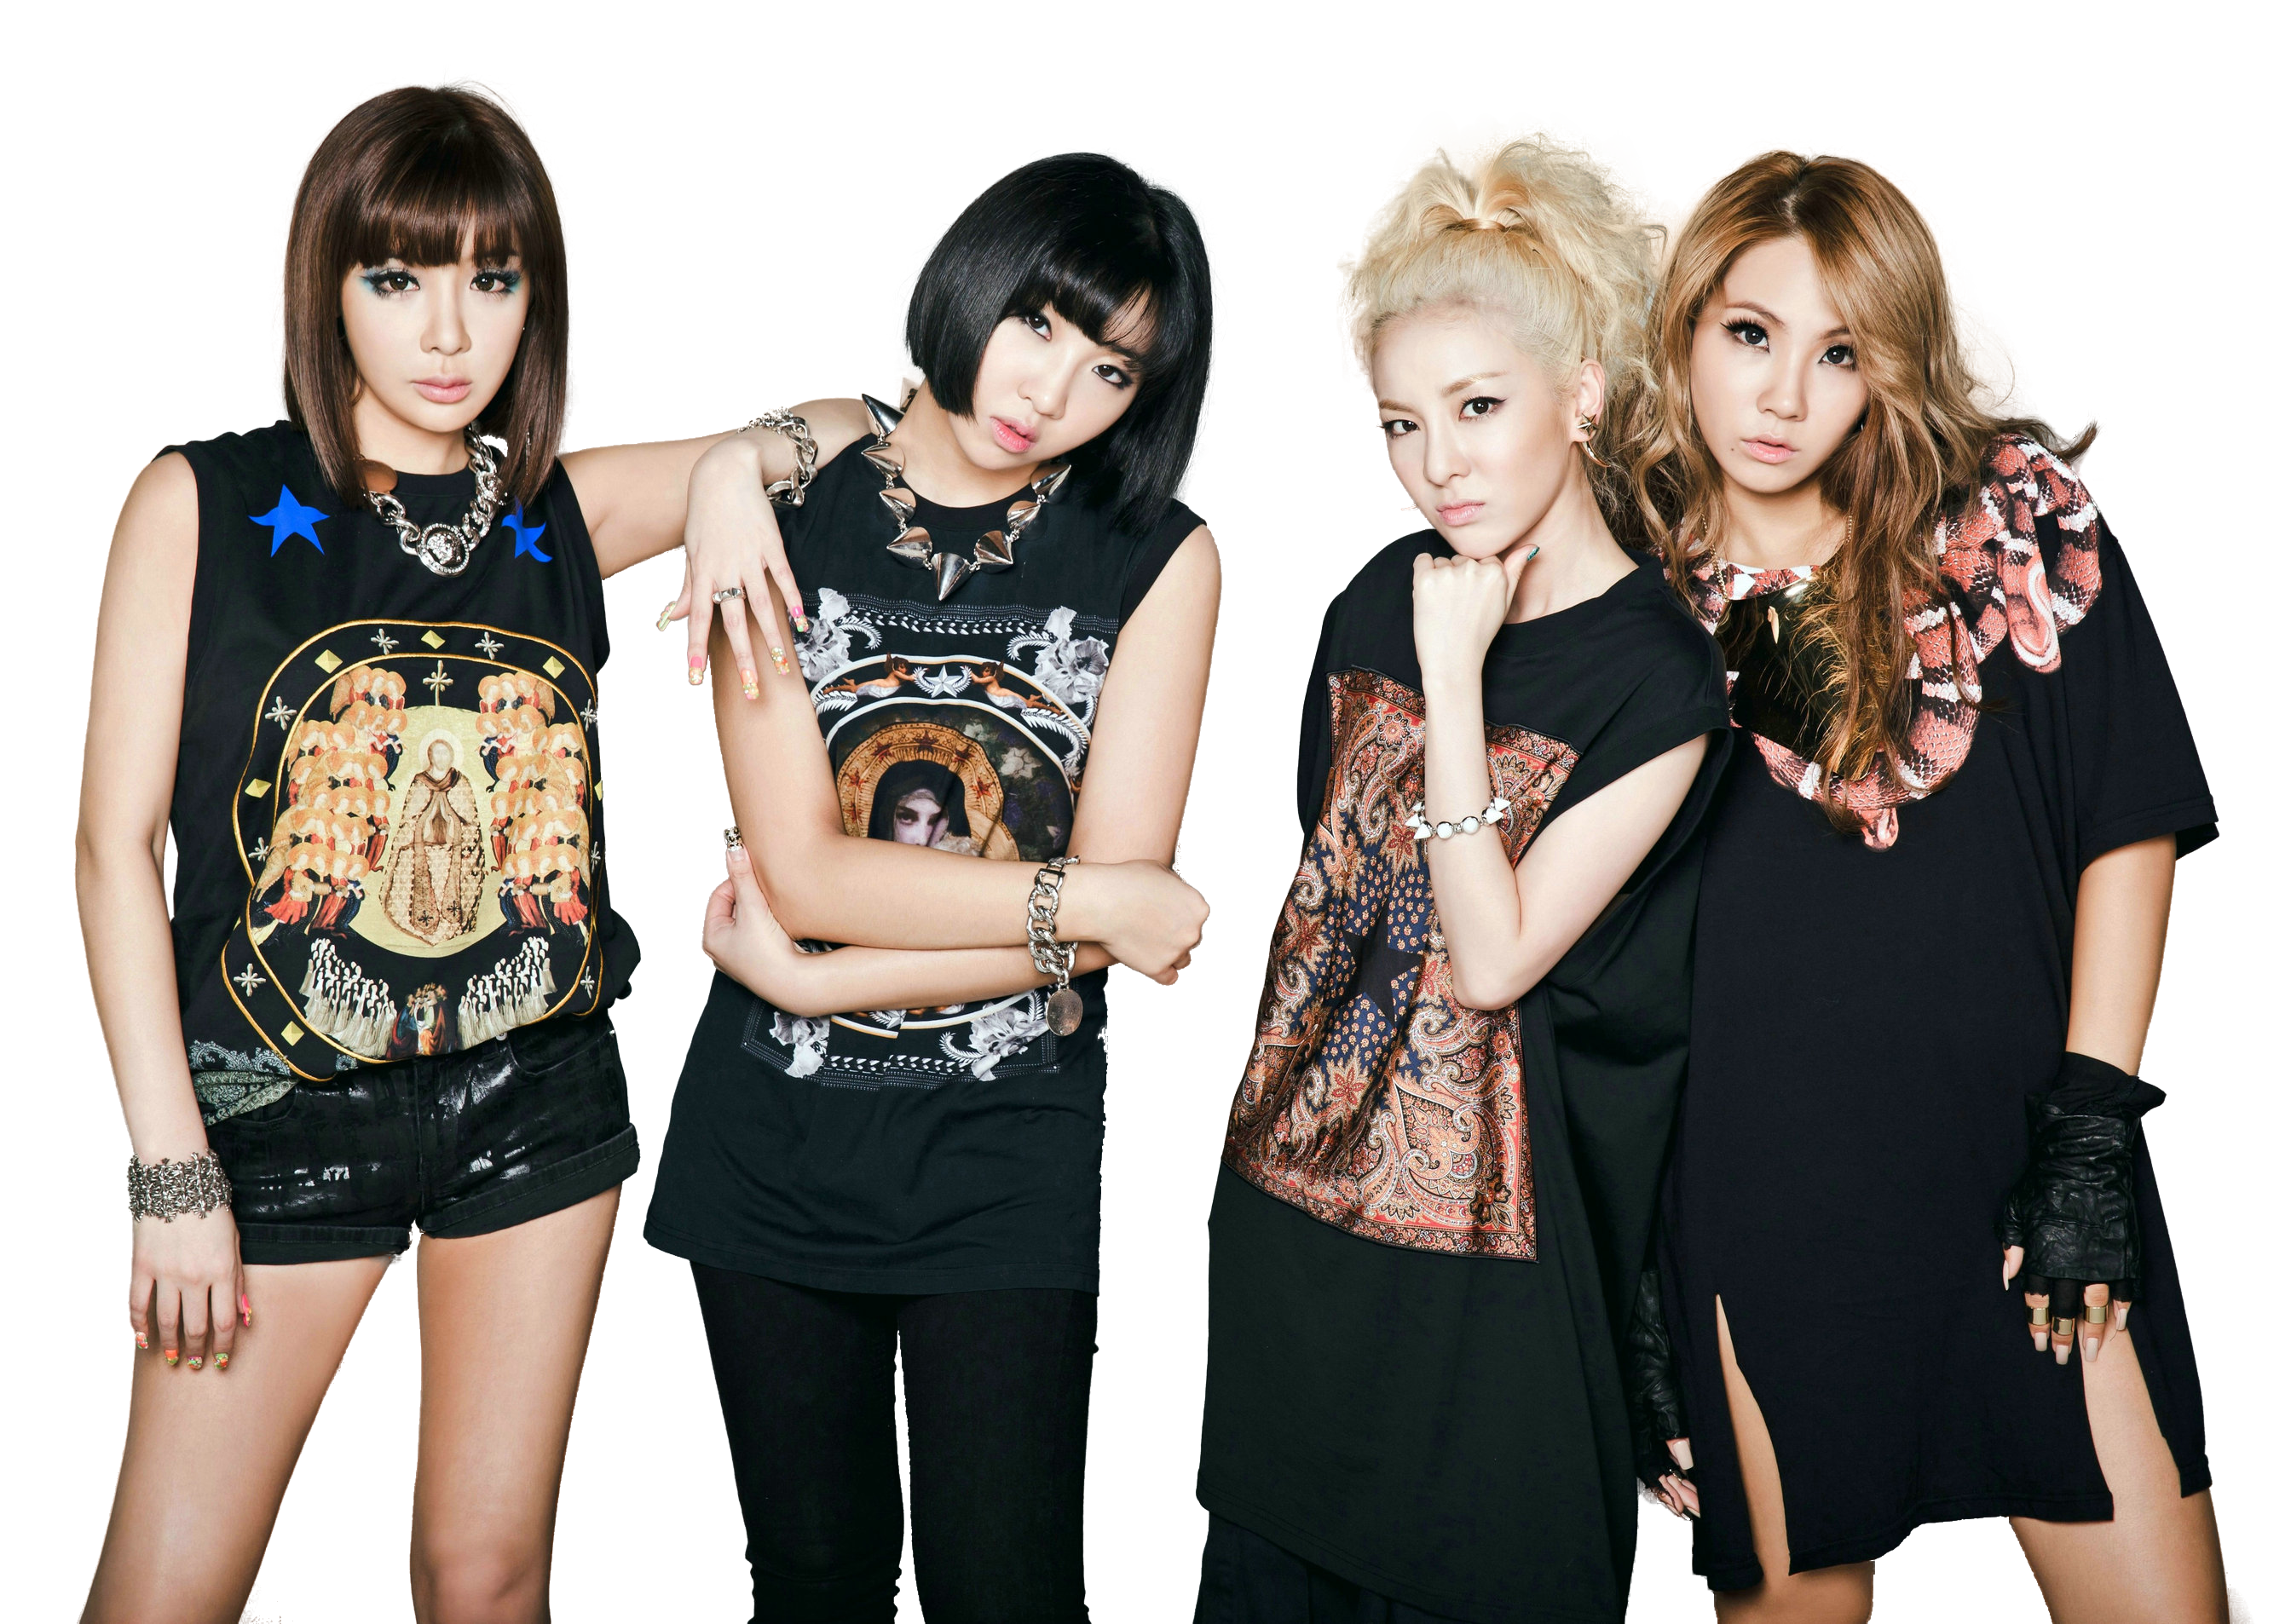 Amazing 2NE1 Pictures & Backgrounds